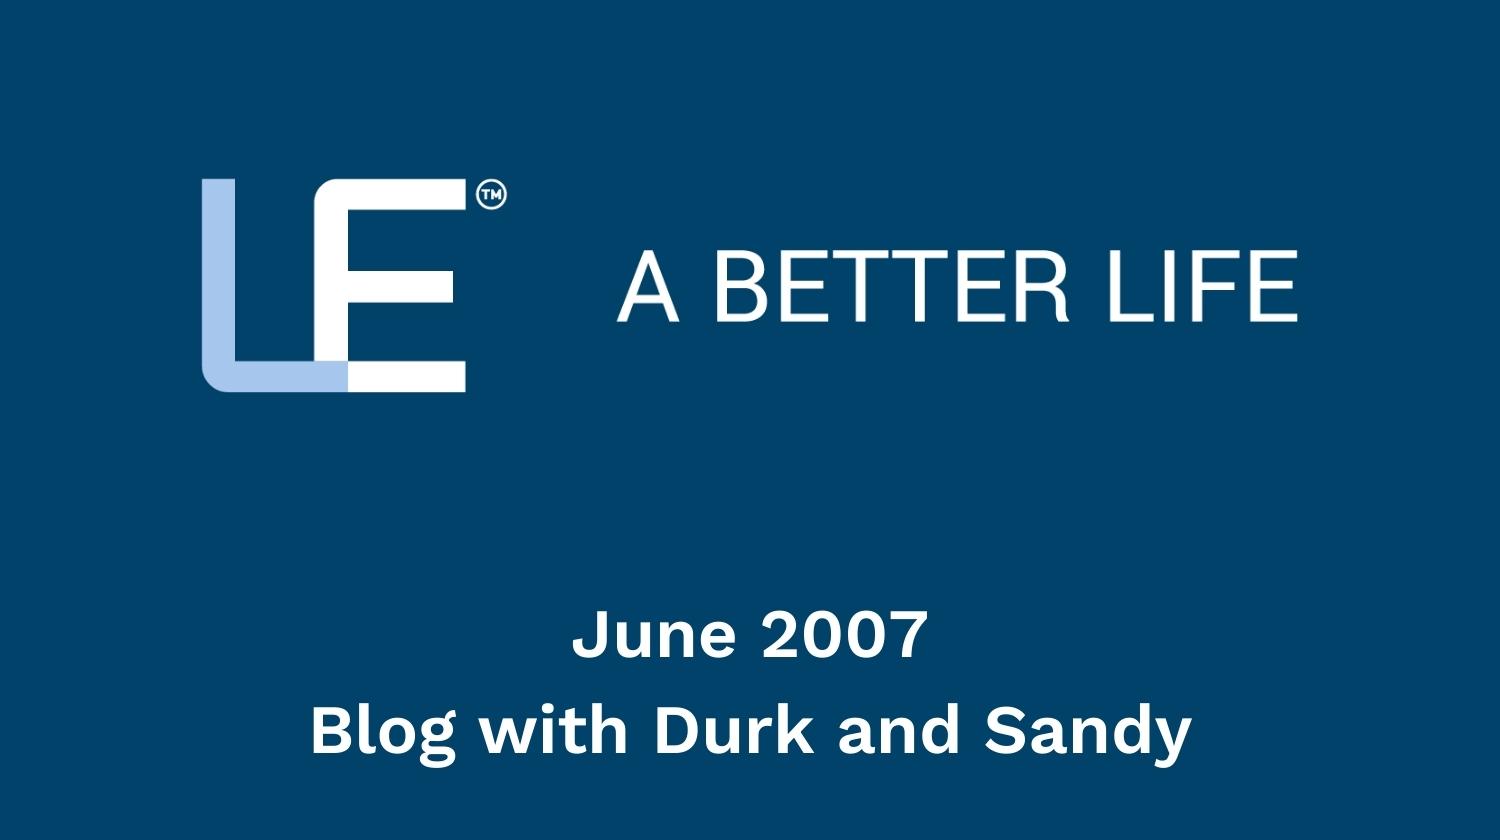 June 2007 Blog with Durk and Sandy